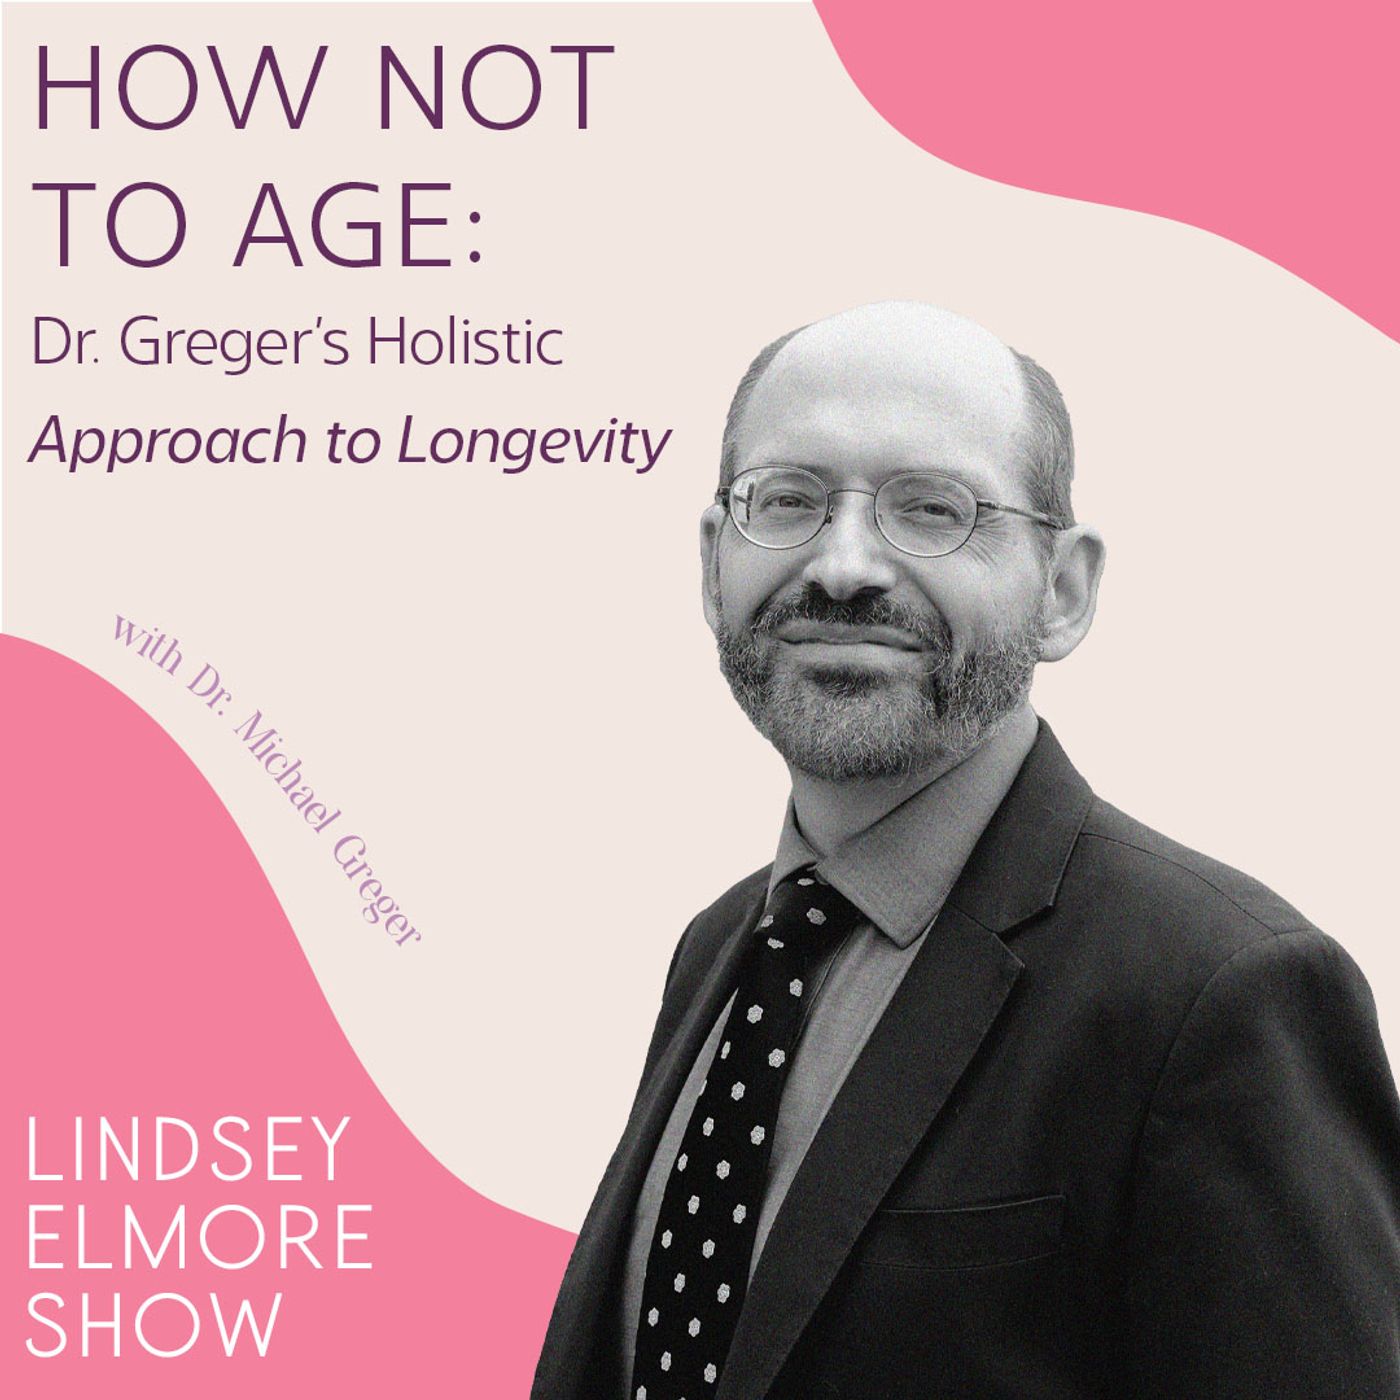 How Not to Age: Dr. Greger's Holistic Approach to Longevity